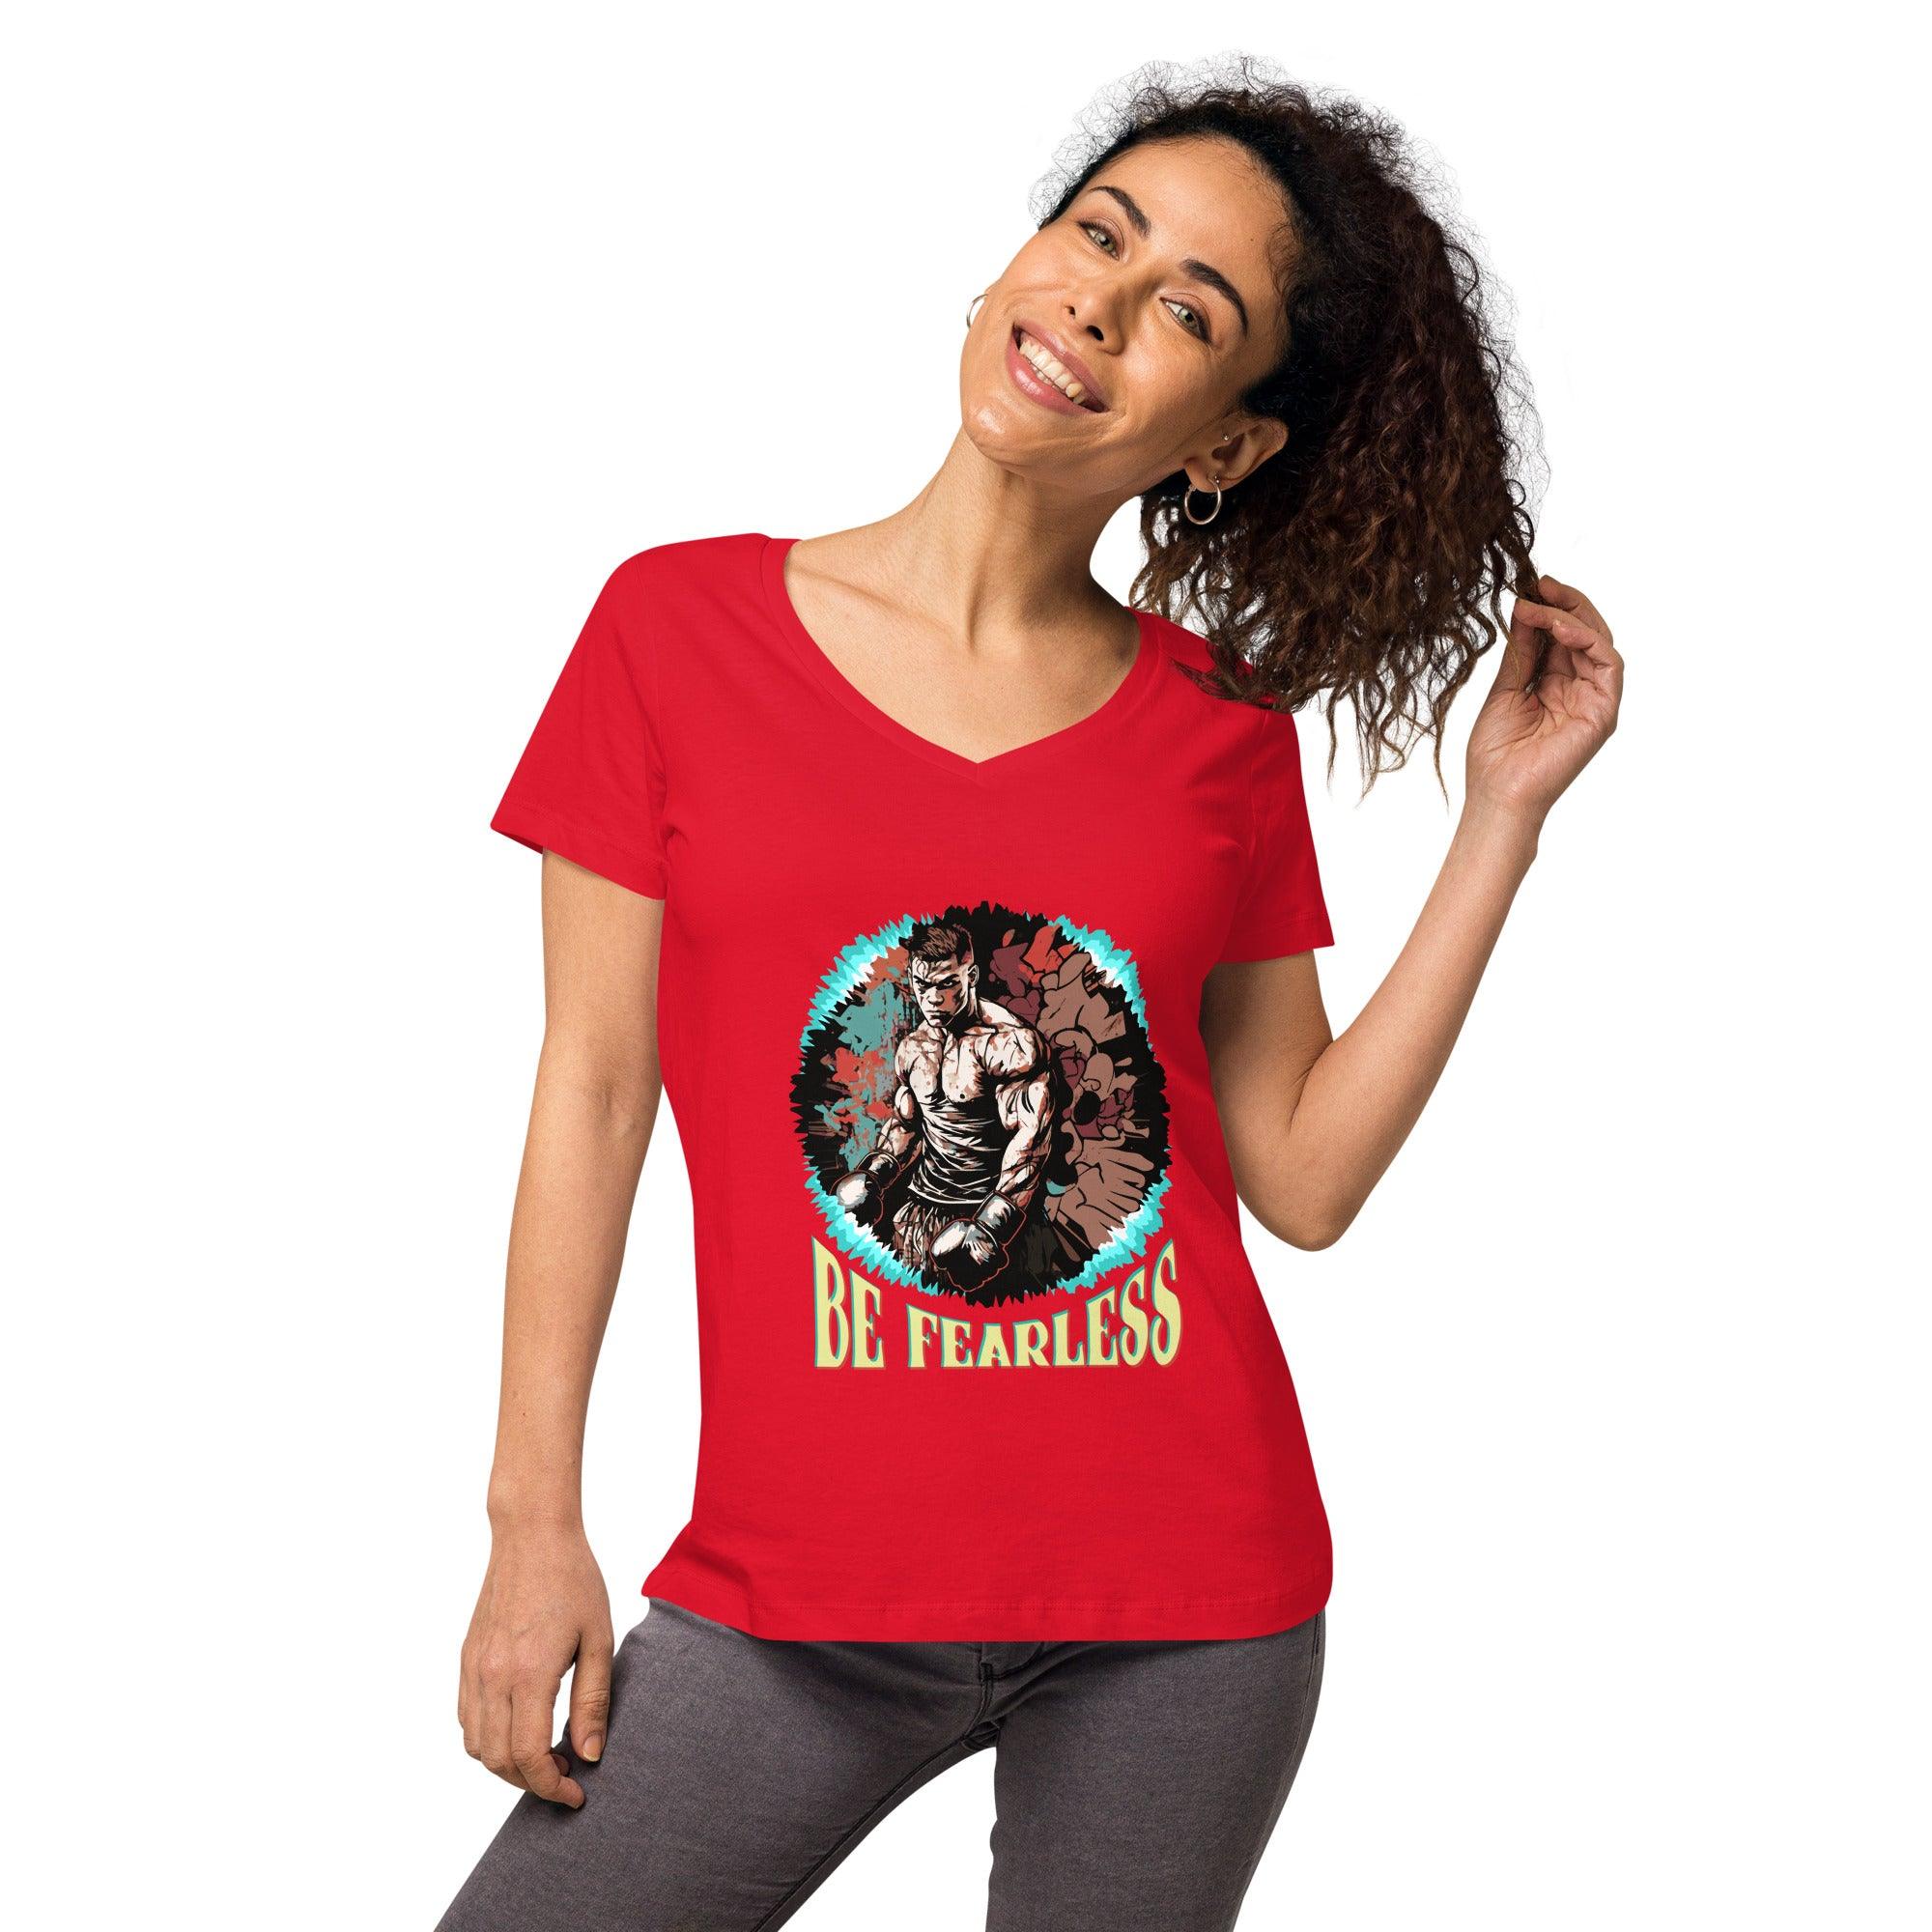 Be Fearless Women’s Fitted V-neck T-shirt - Beyond T-shirts